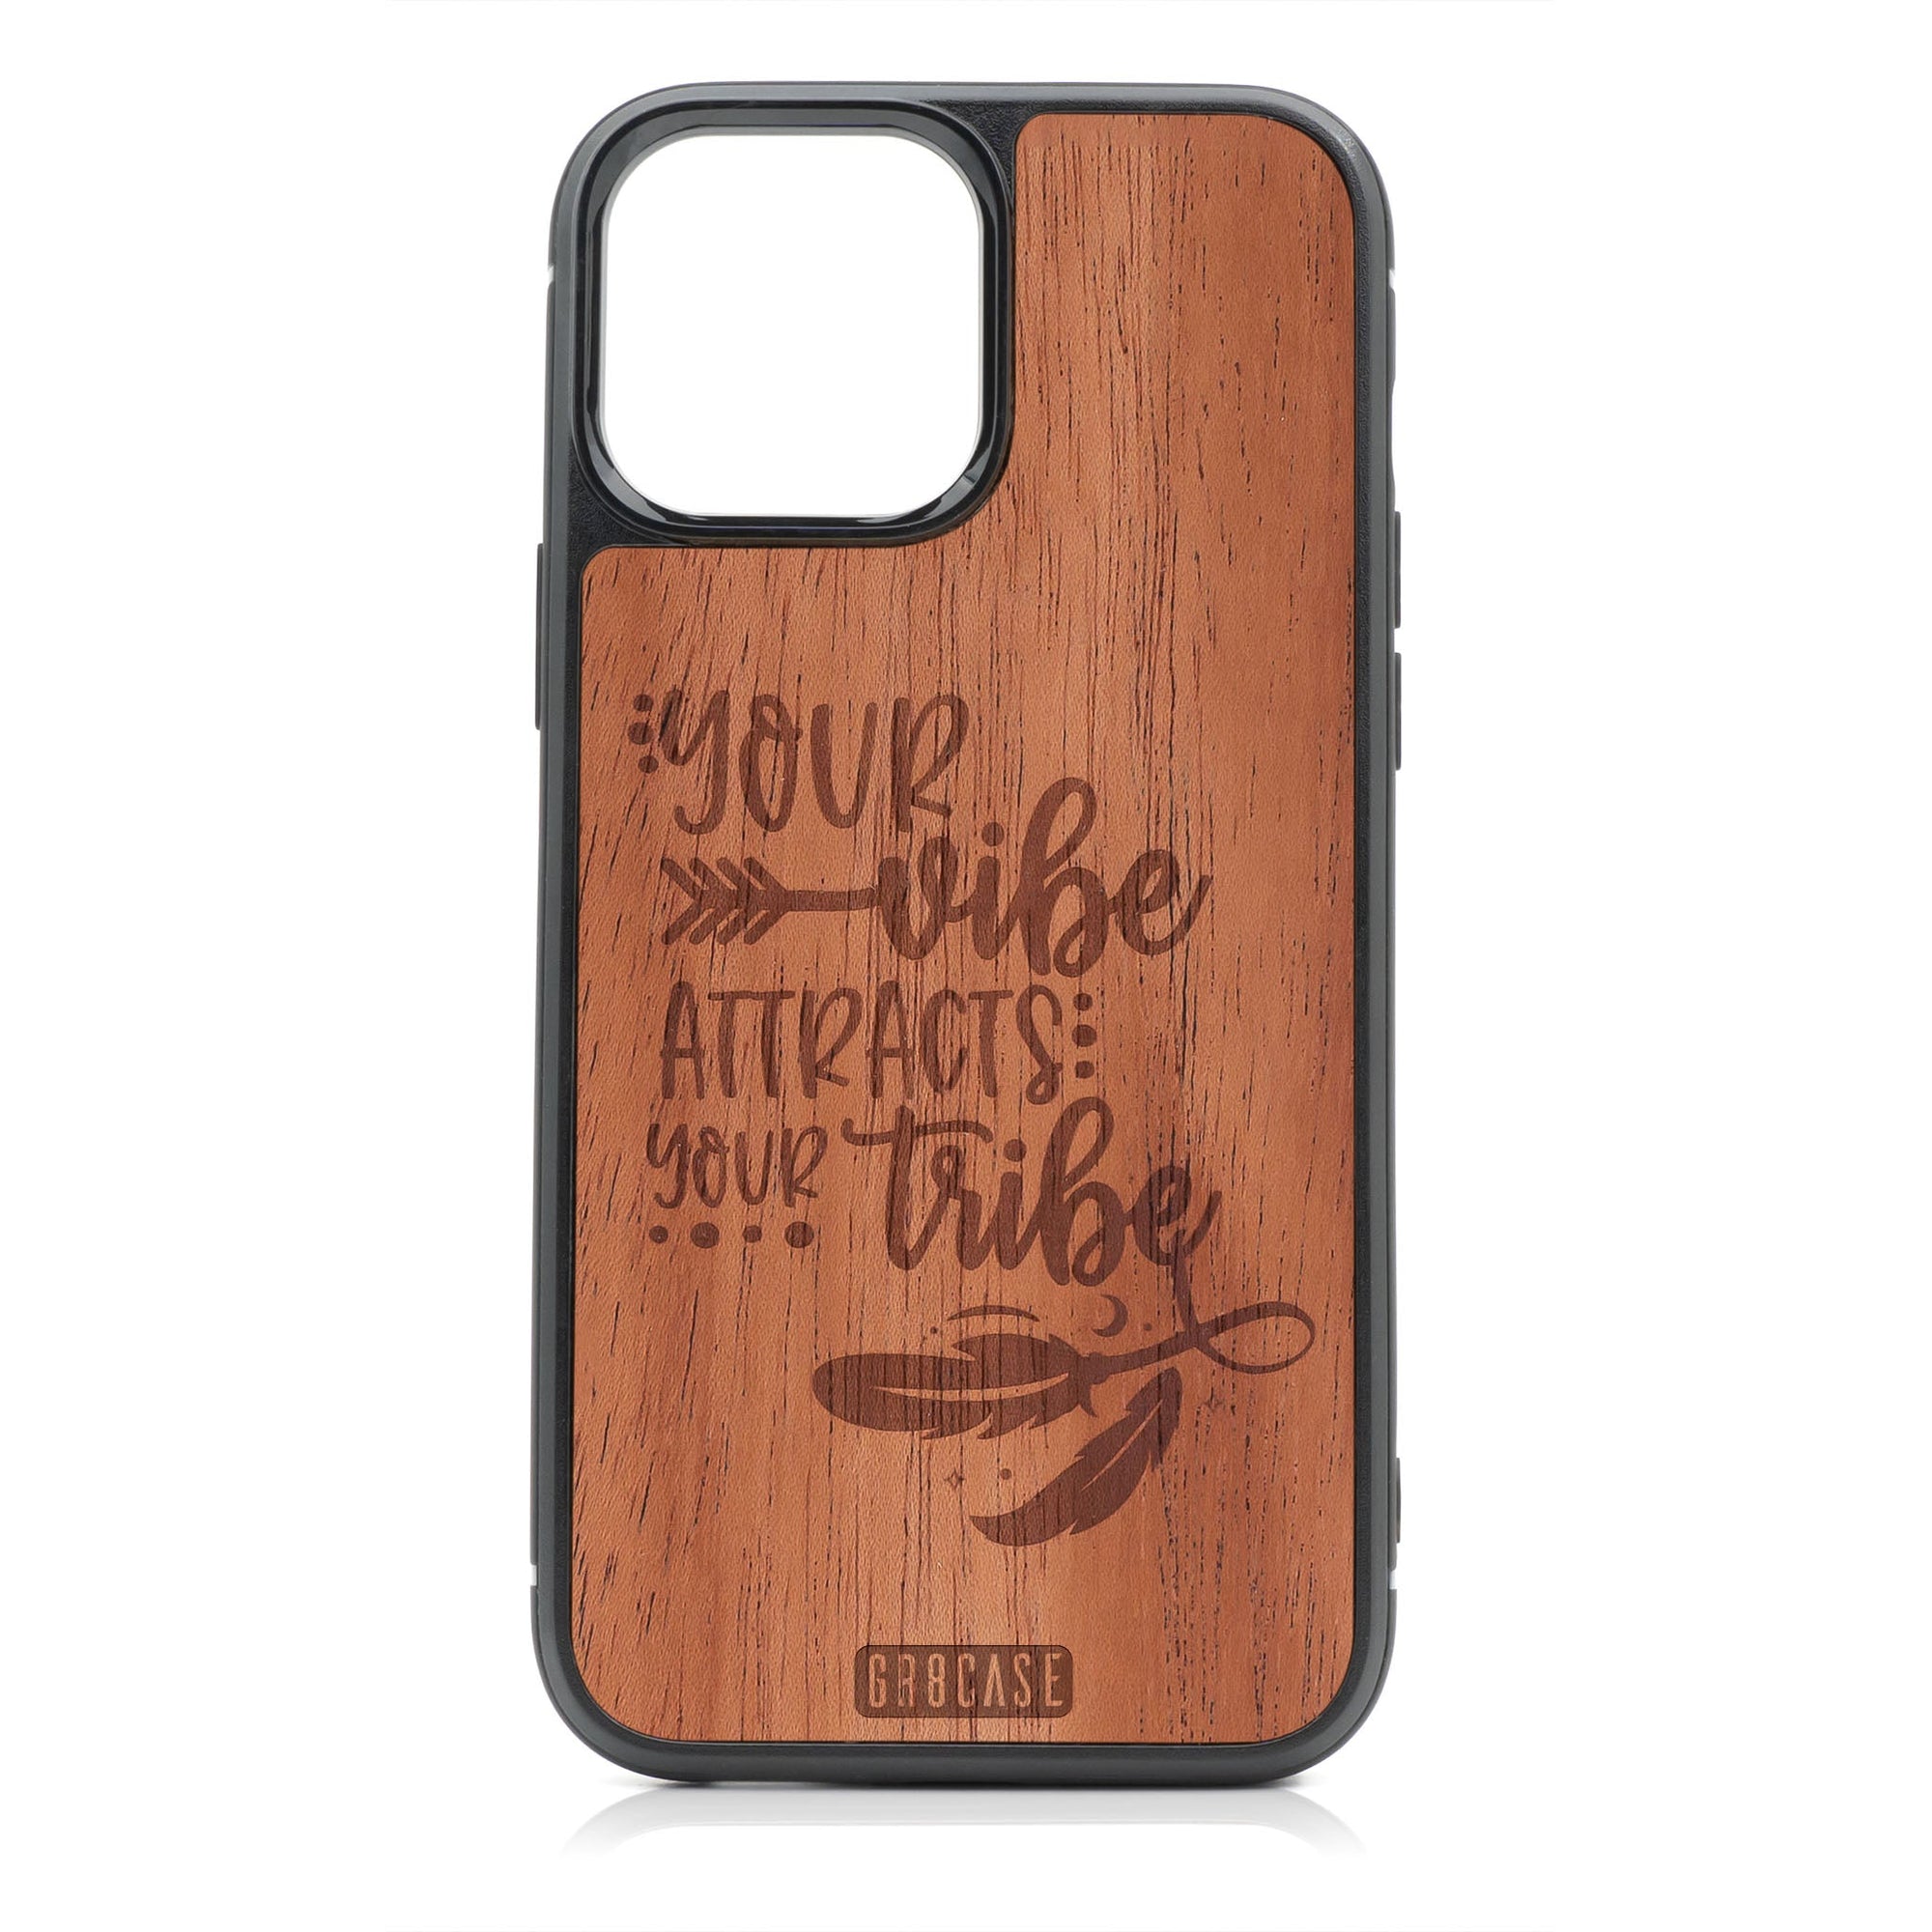 Your Vibe Attracts Your Tribe Design Wood Case For iPhone 14 Pro Max